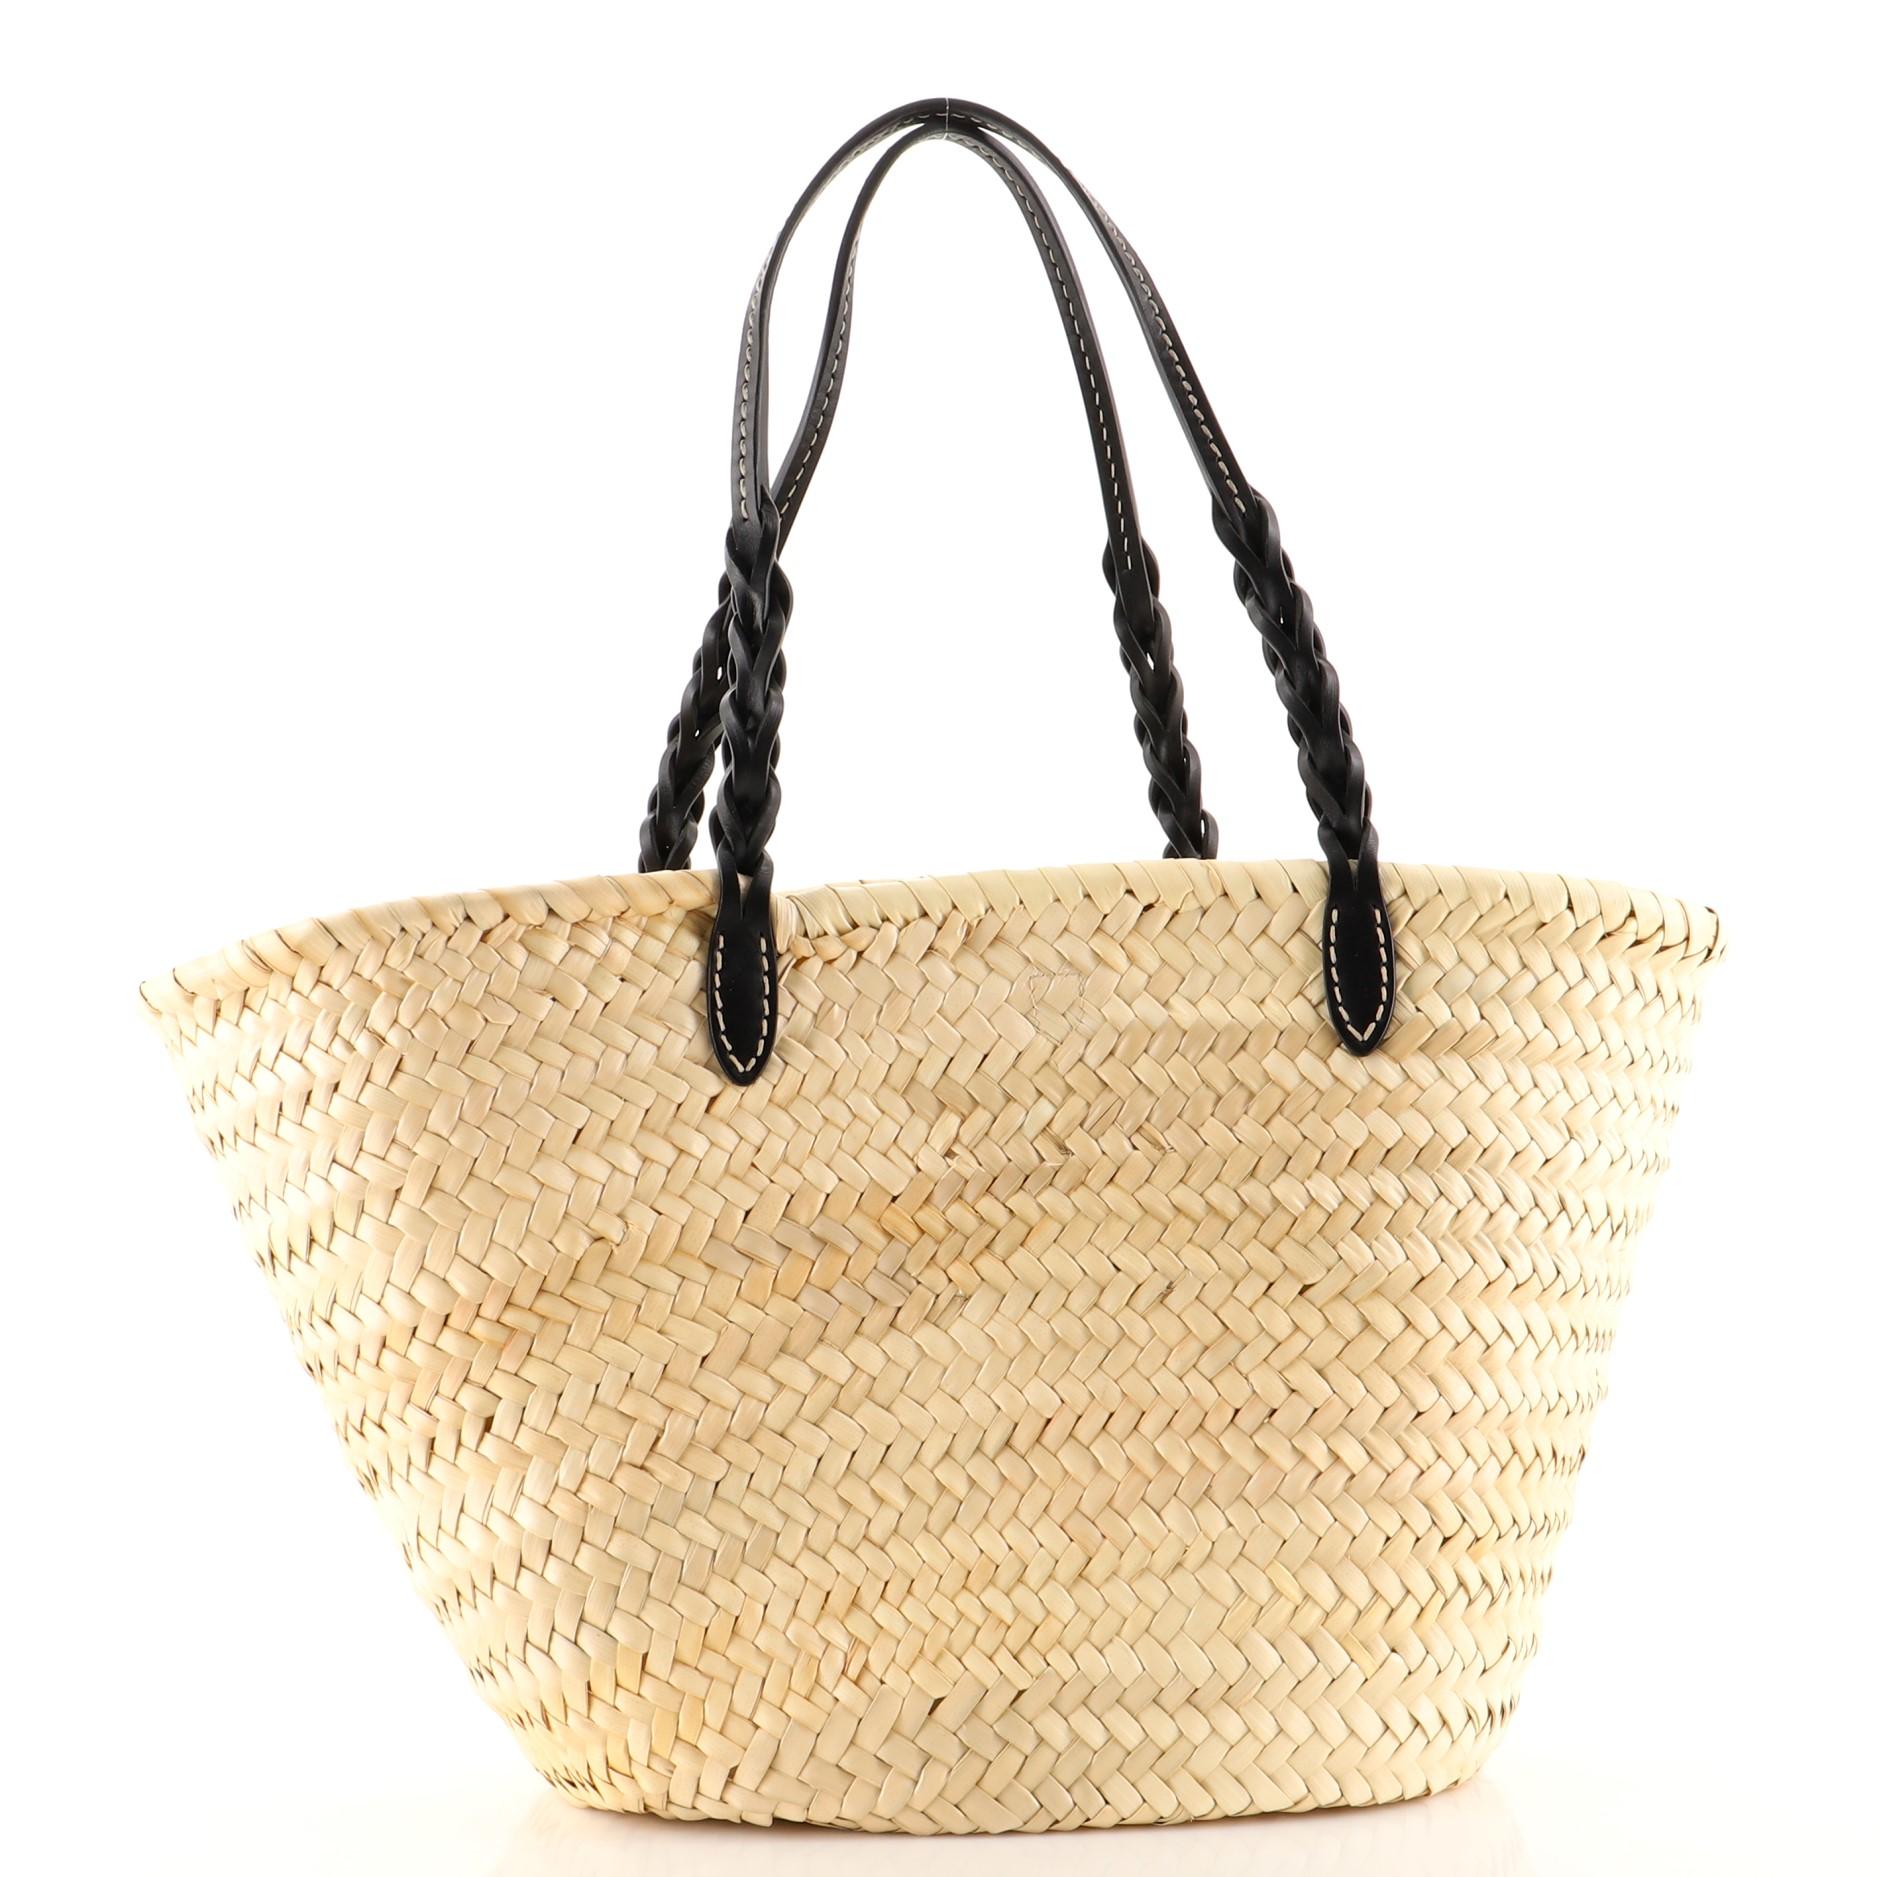 Women's or Men's Prada Basket Tote Bag Straw with Leather